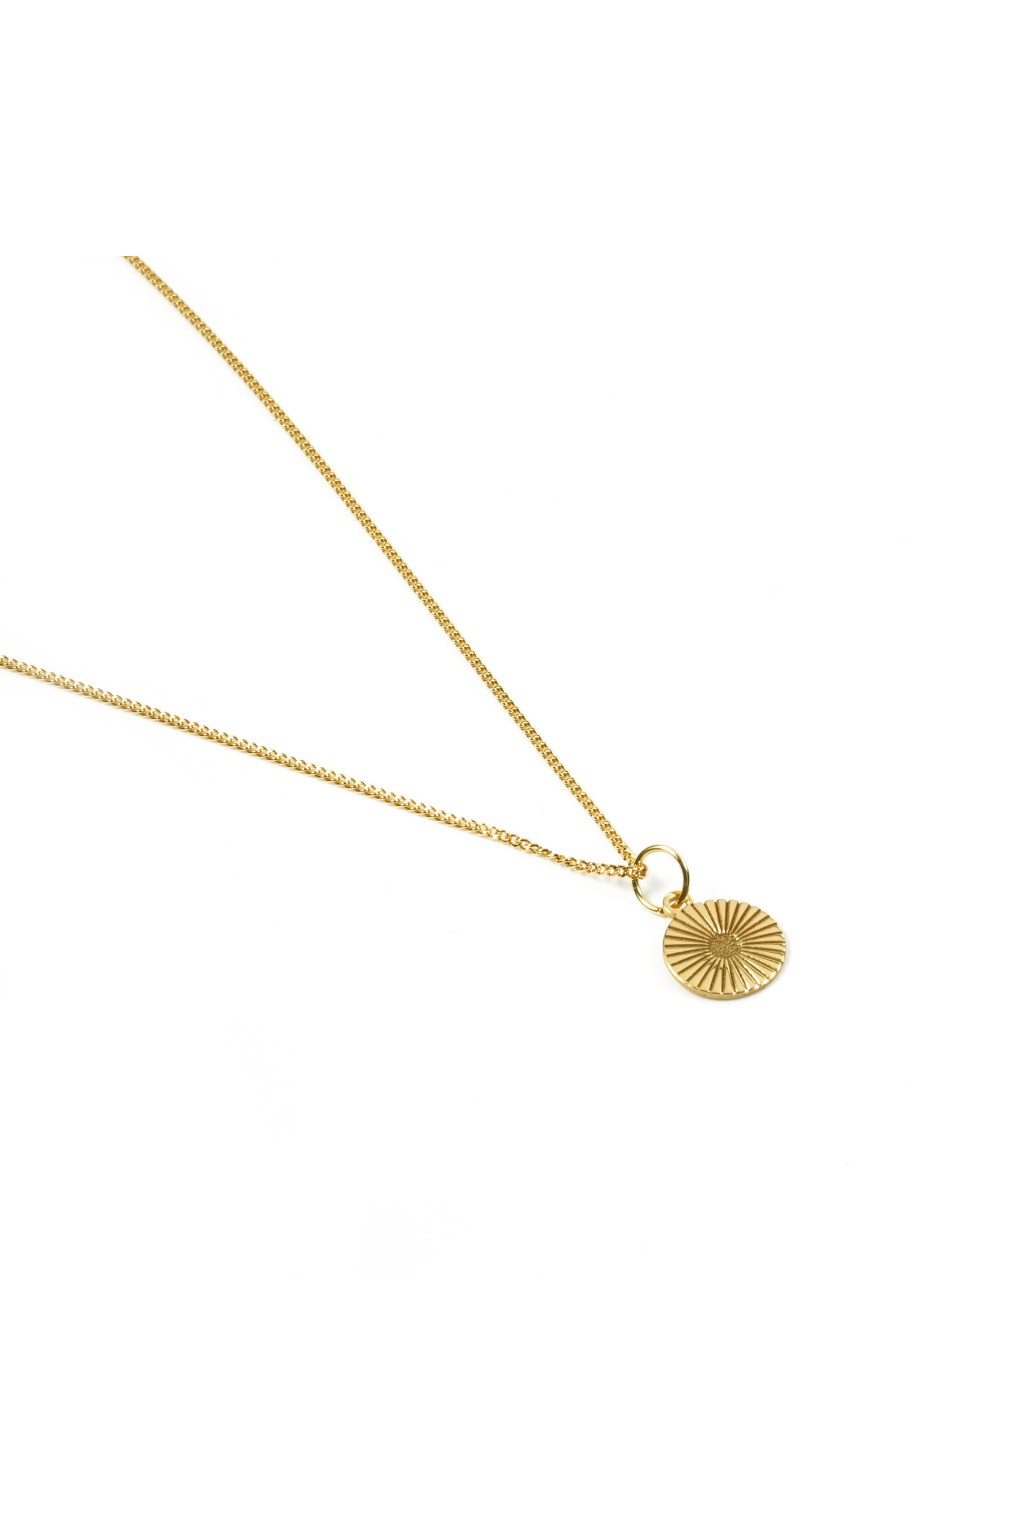 gold plated necklace with sun design to engrave